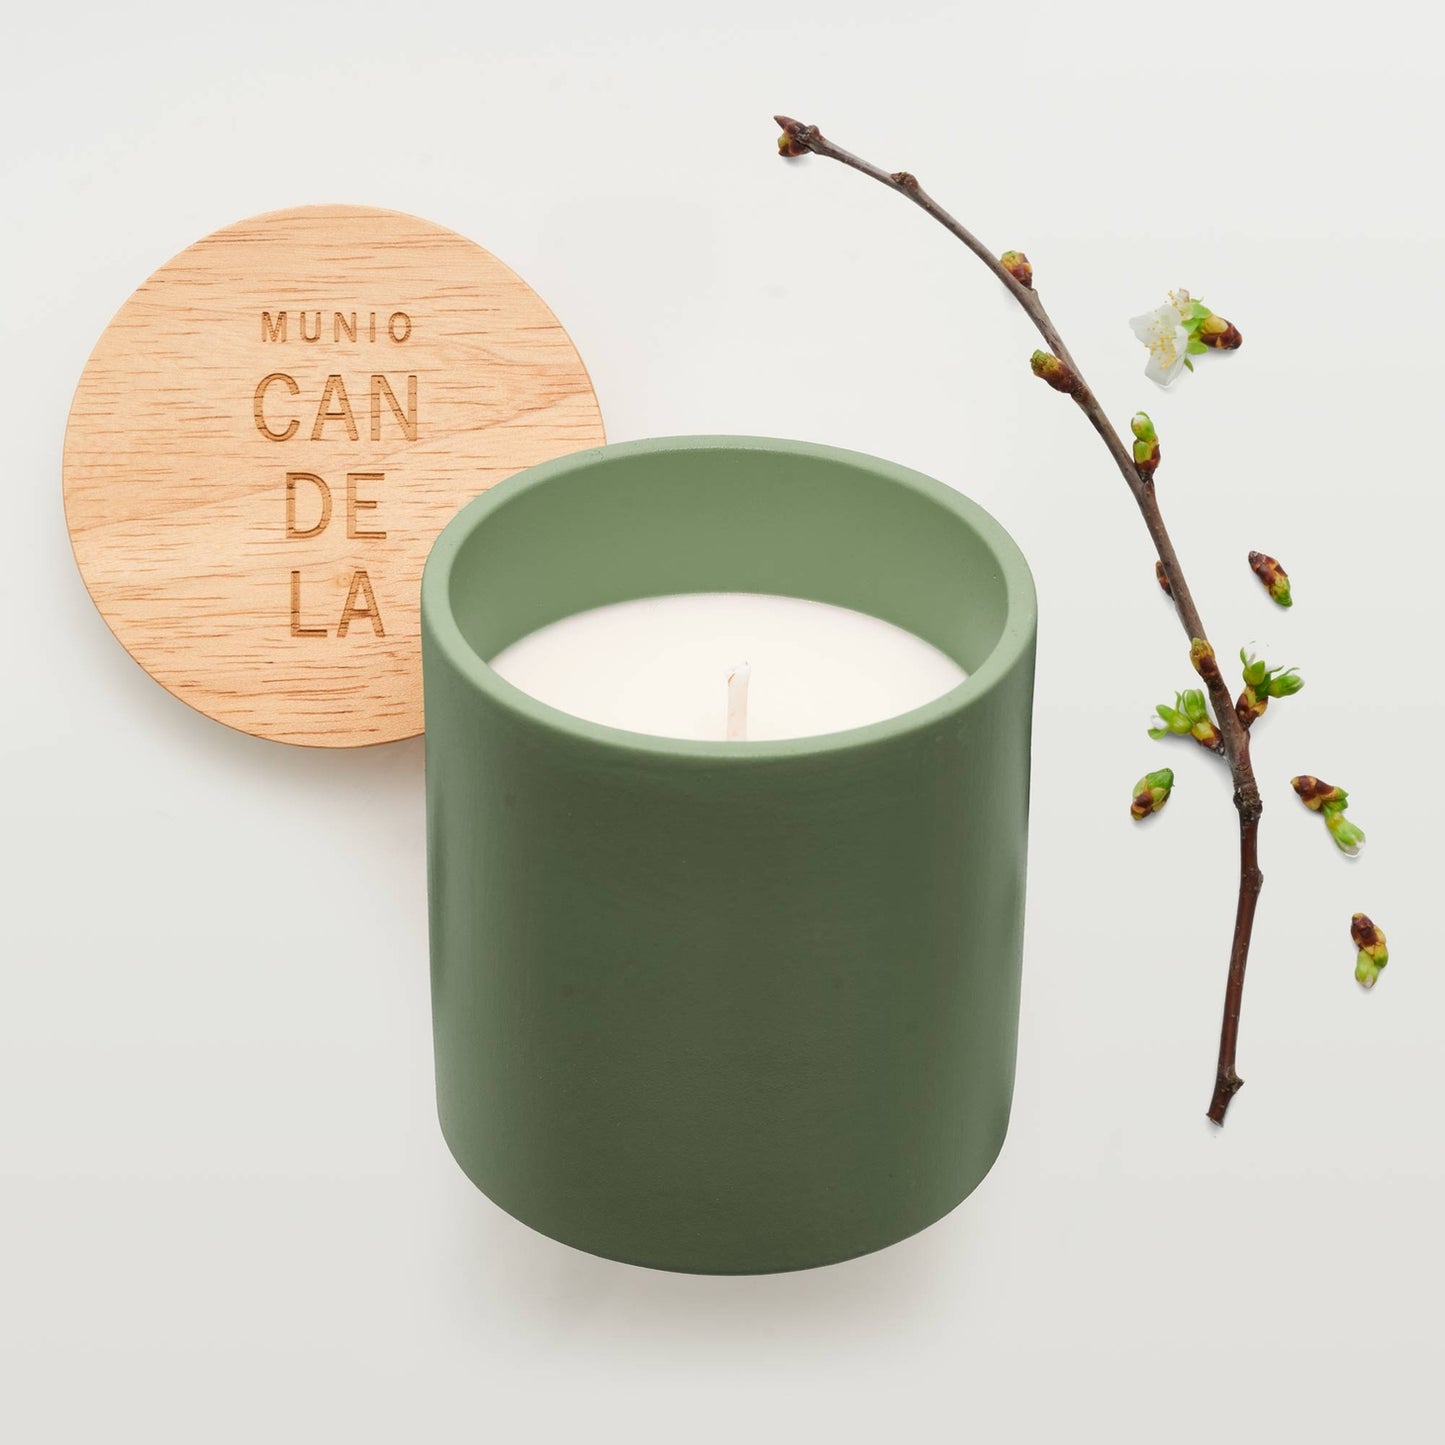 The MUNIO Apple Blossom Candle